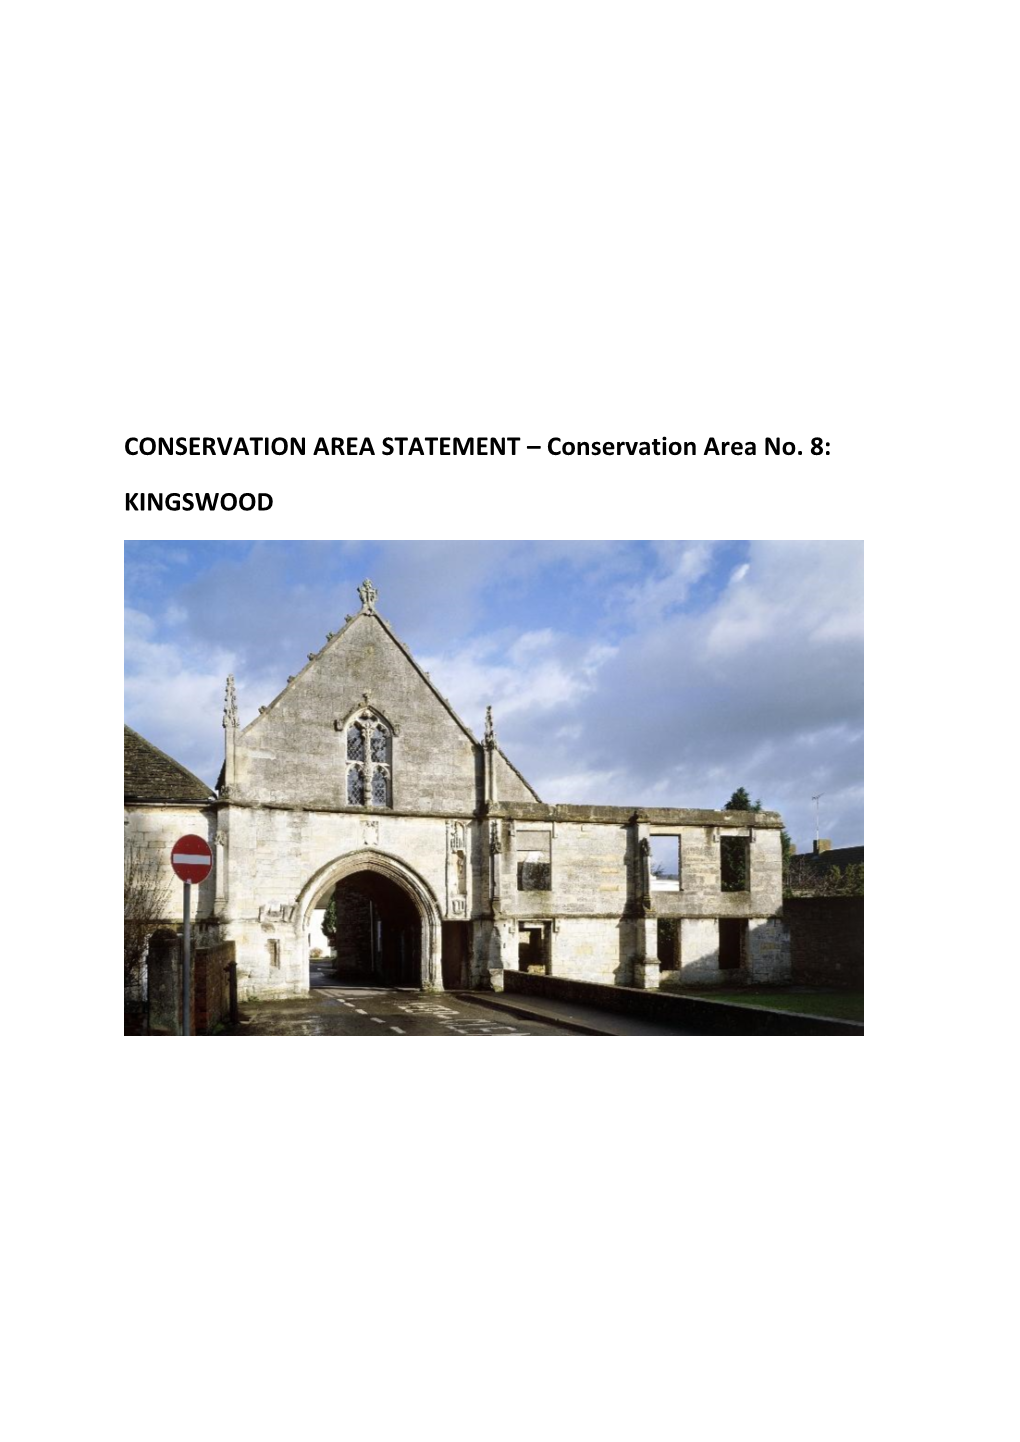 CONSERVATION AREA STATEMENT – Conservation Area No